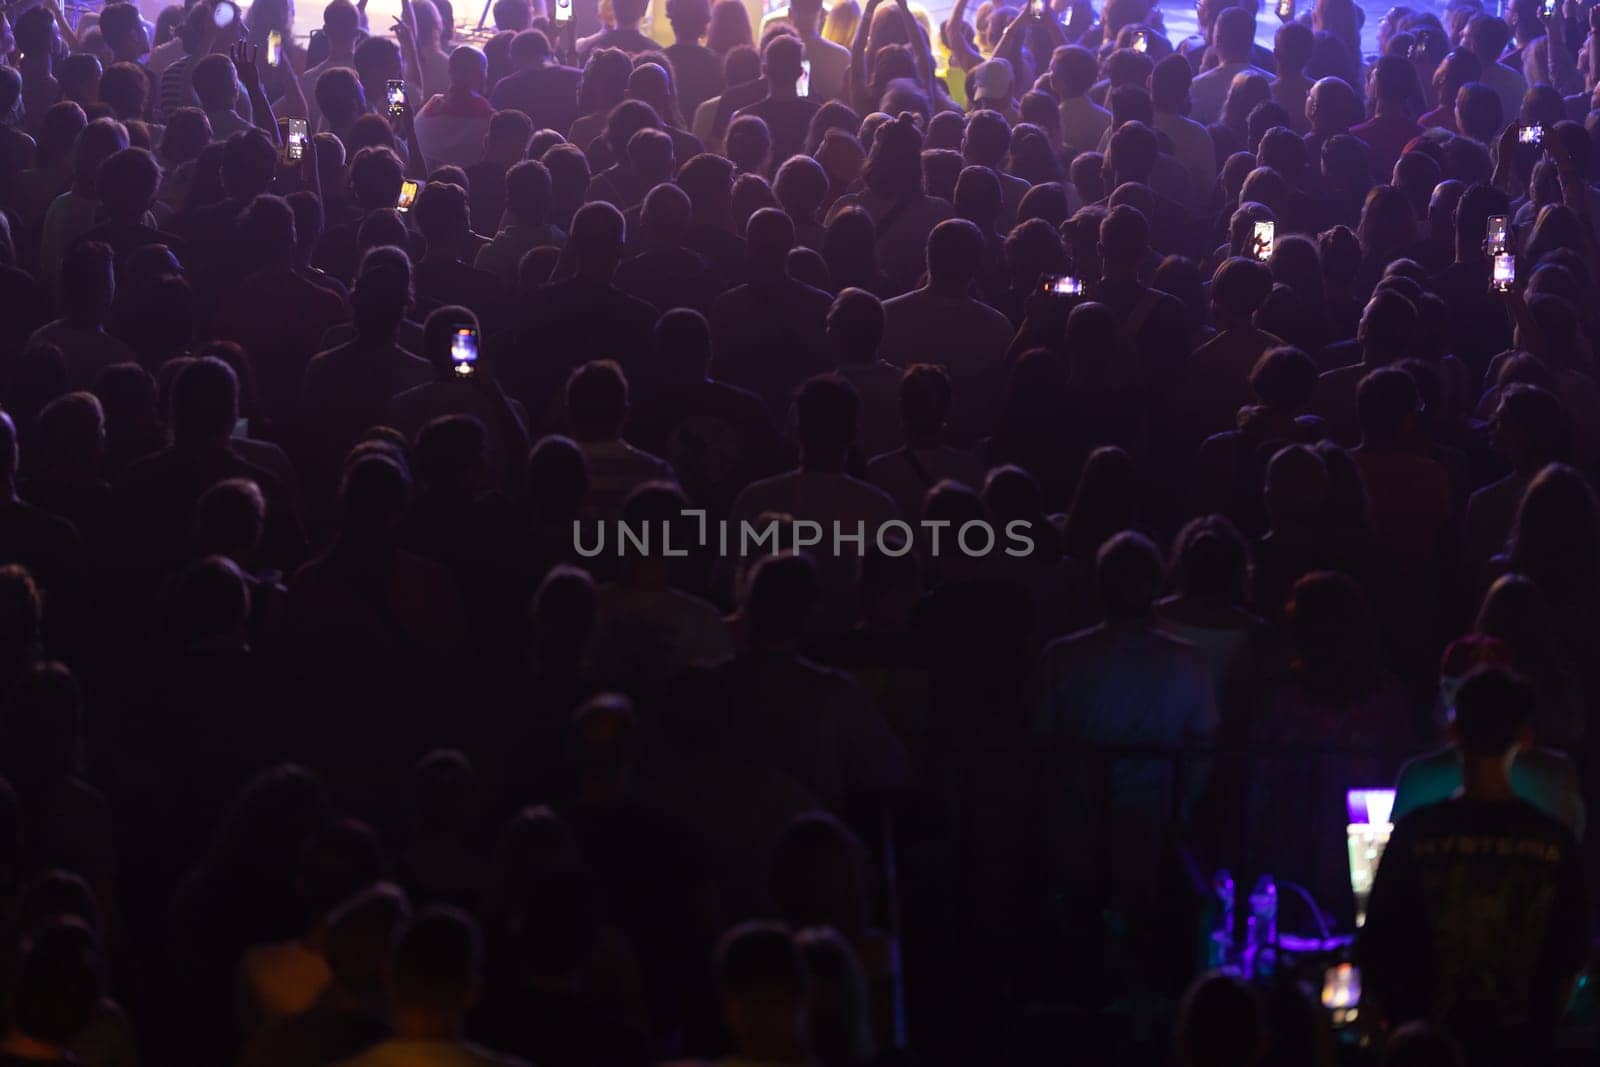 An attentive audience in a dimly lit venue, focused on the live performance.